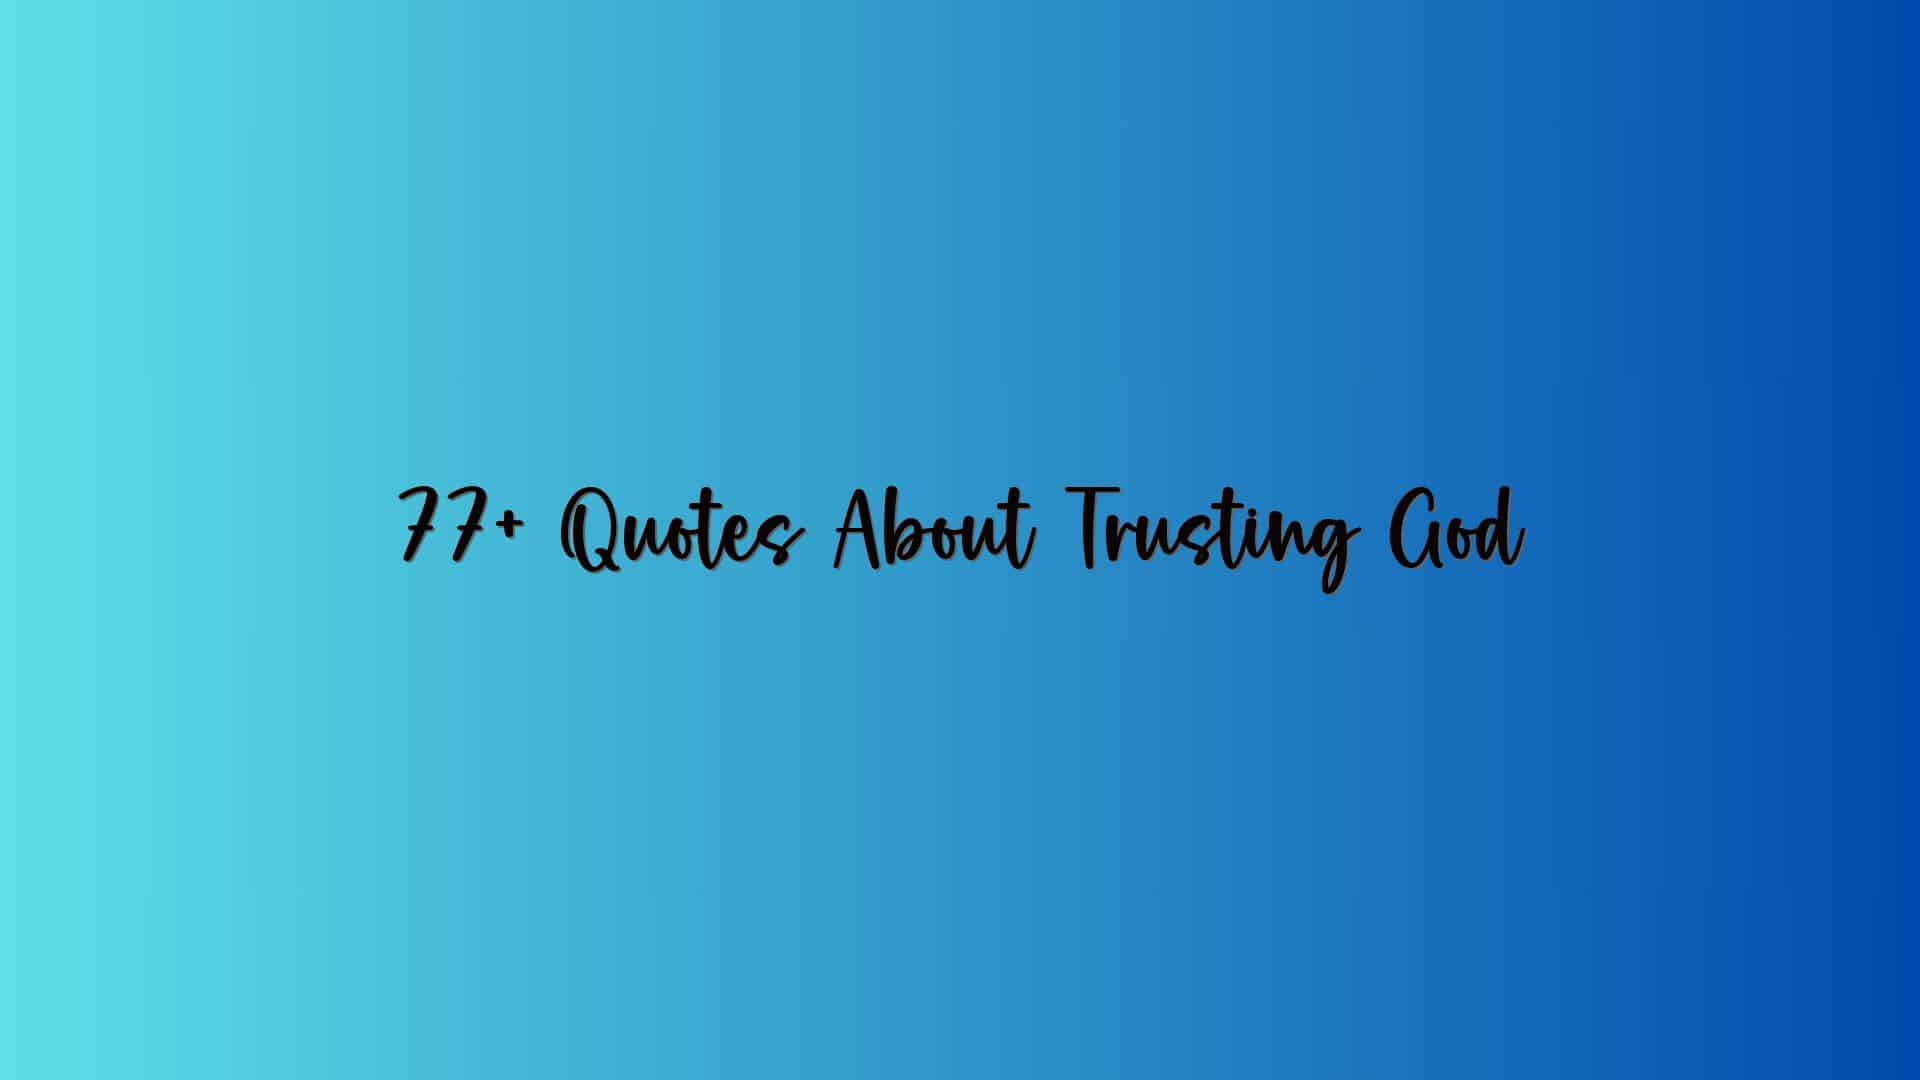 77+ Quotes About Trusting God